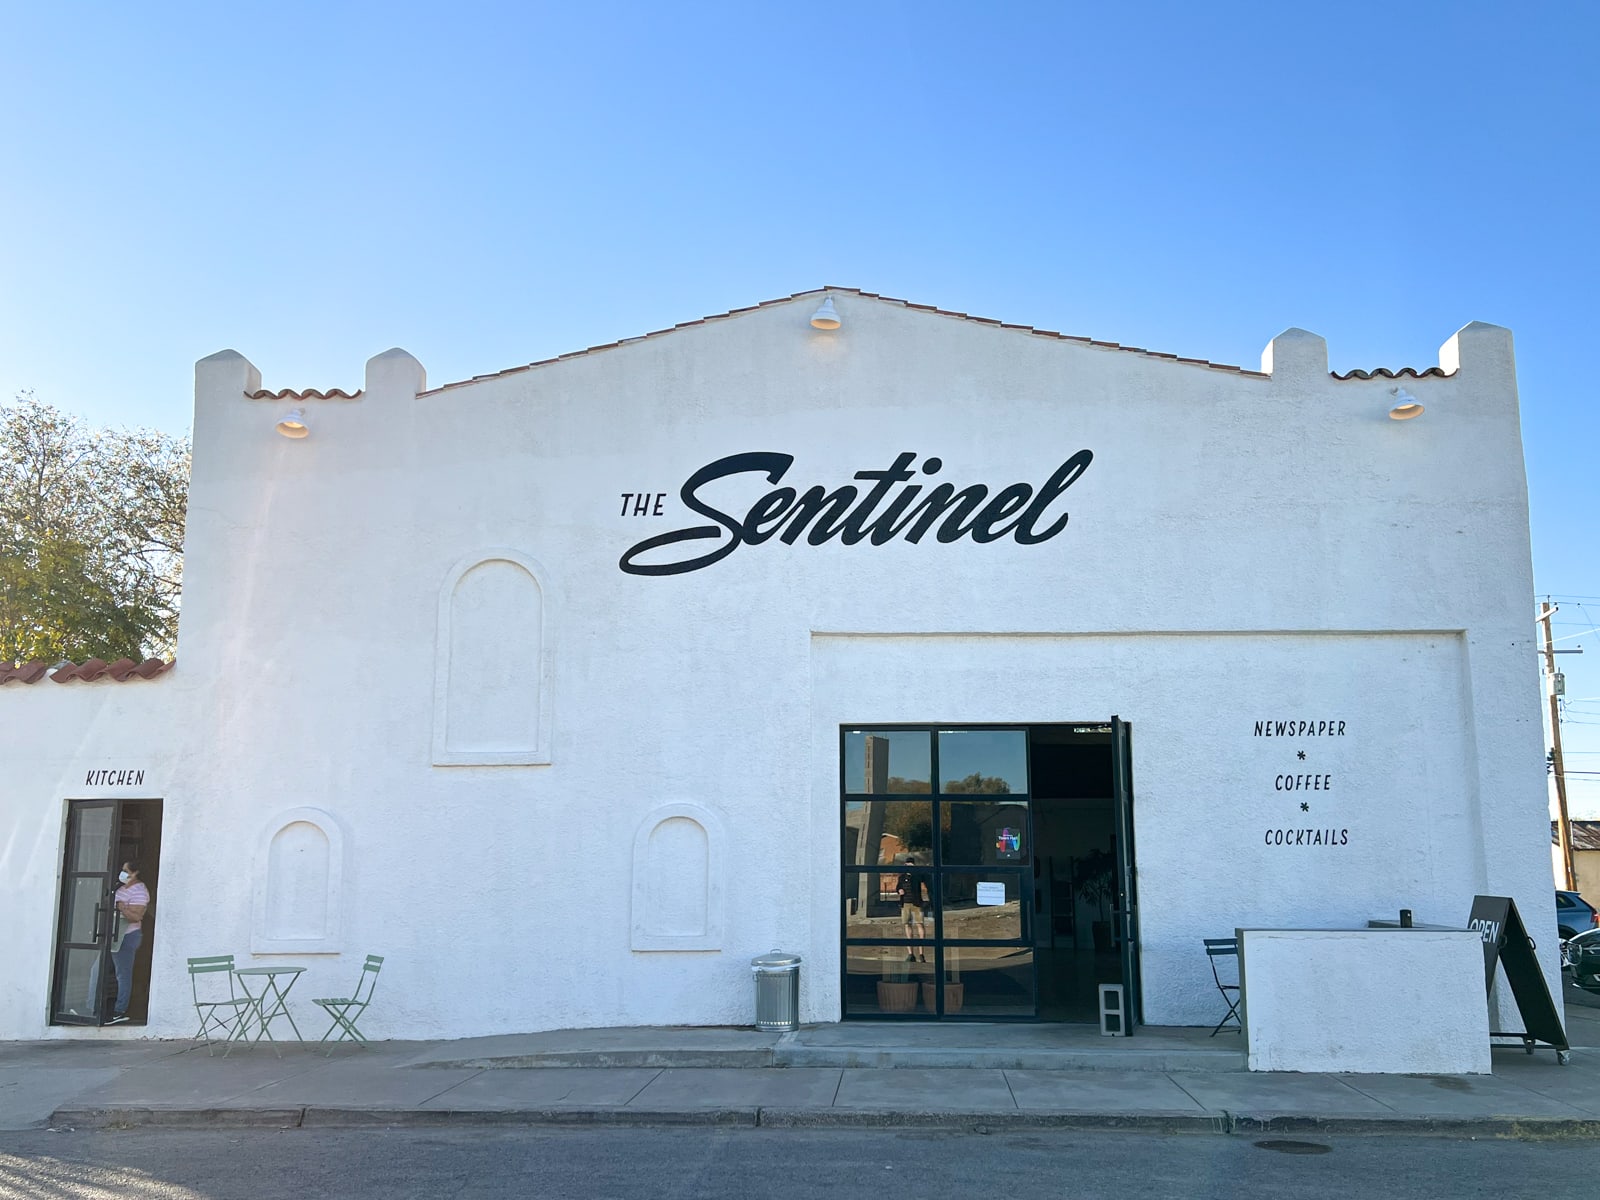 The Sentinel cafe in Marfa